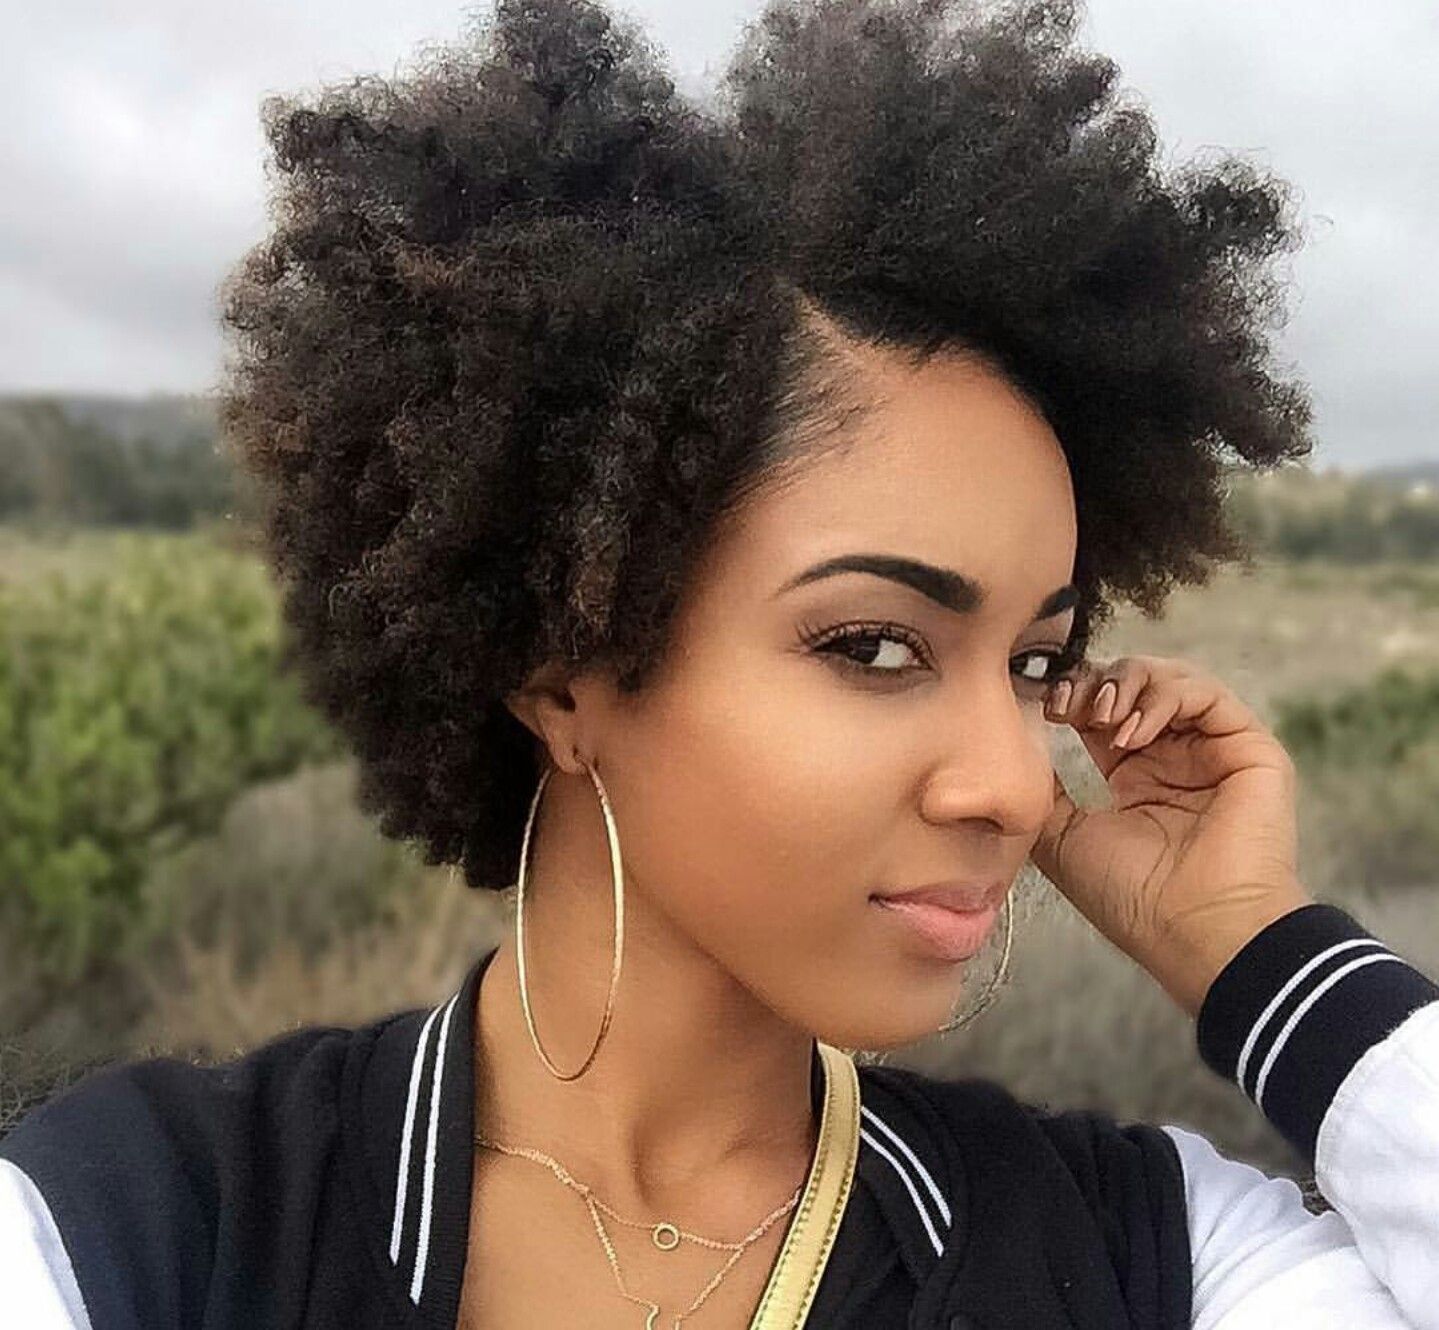 Top 10 natural hairstyle ideas for black women in 2020